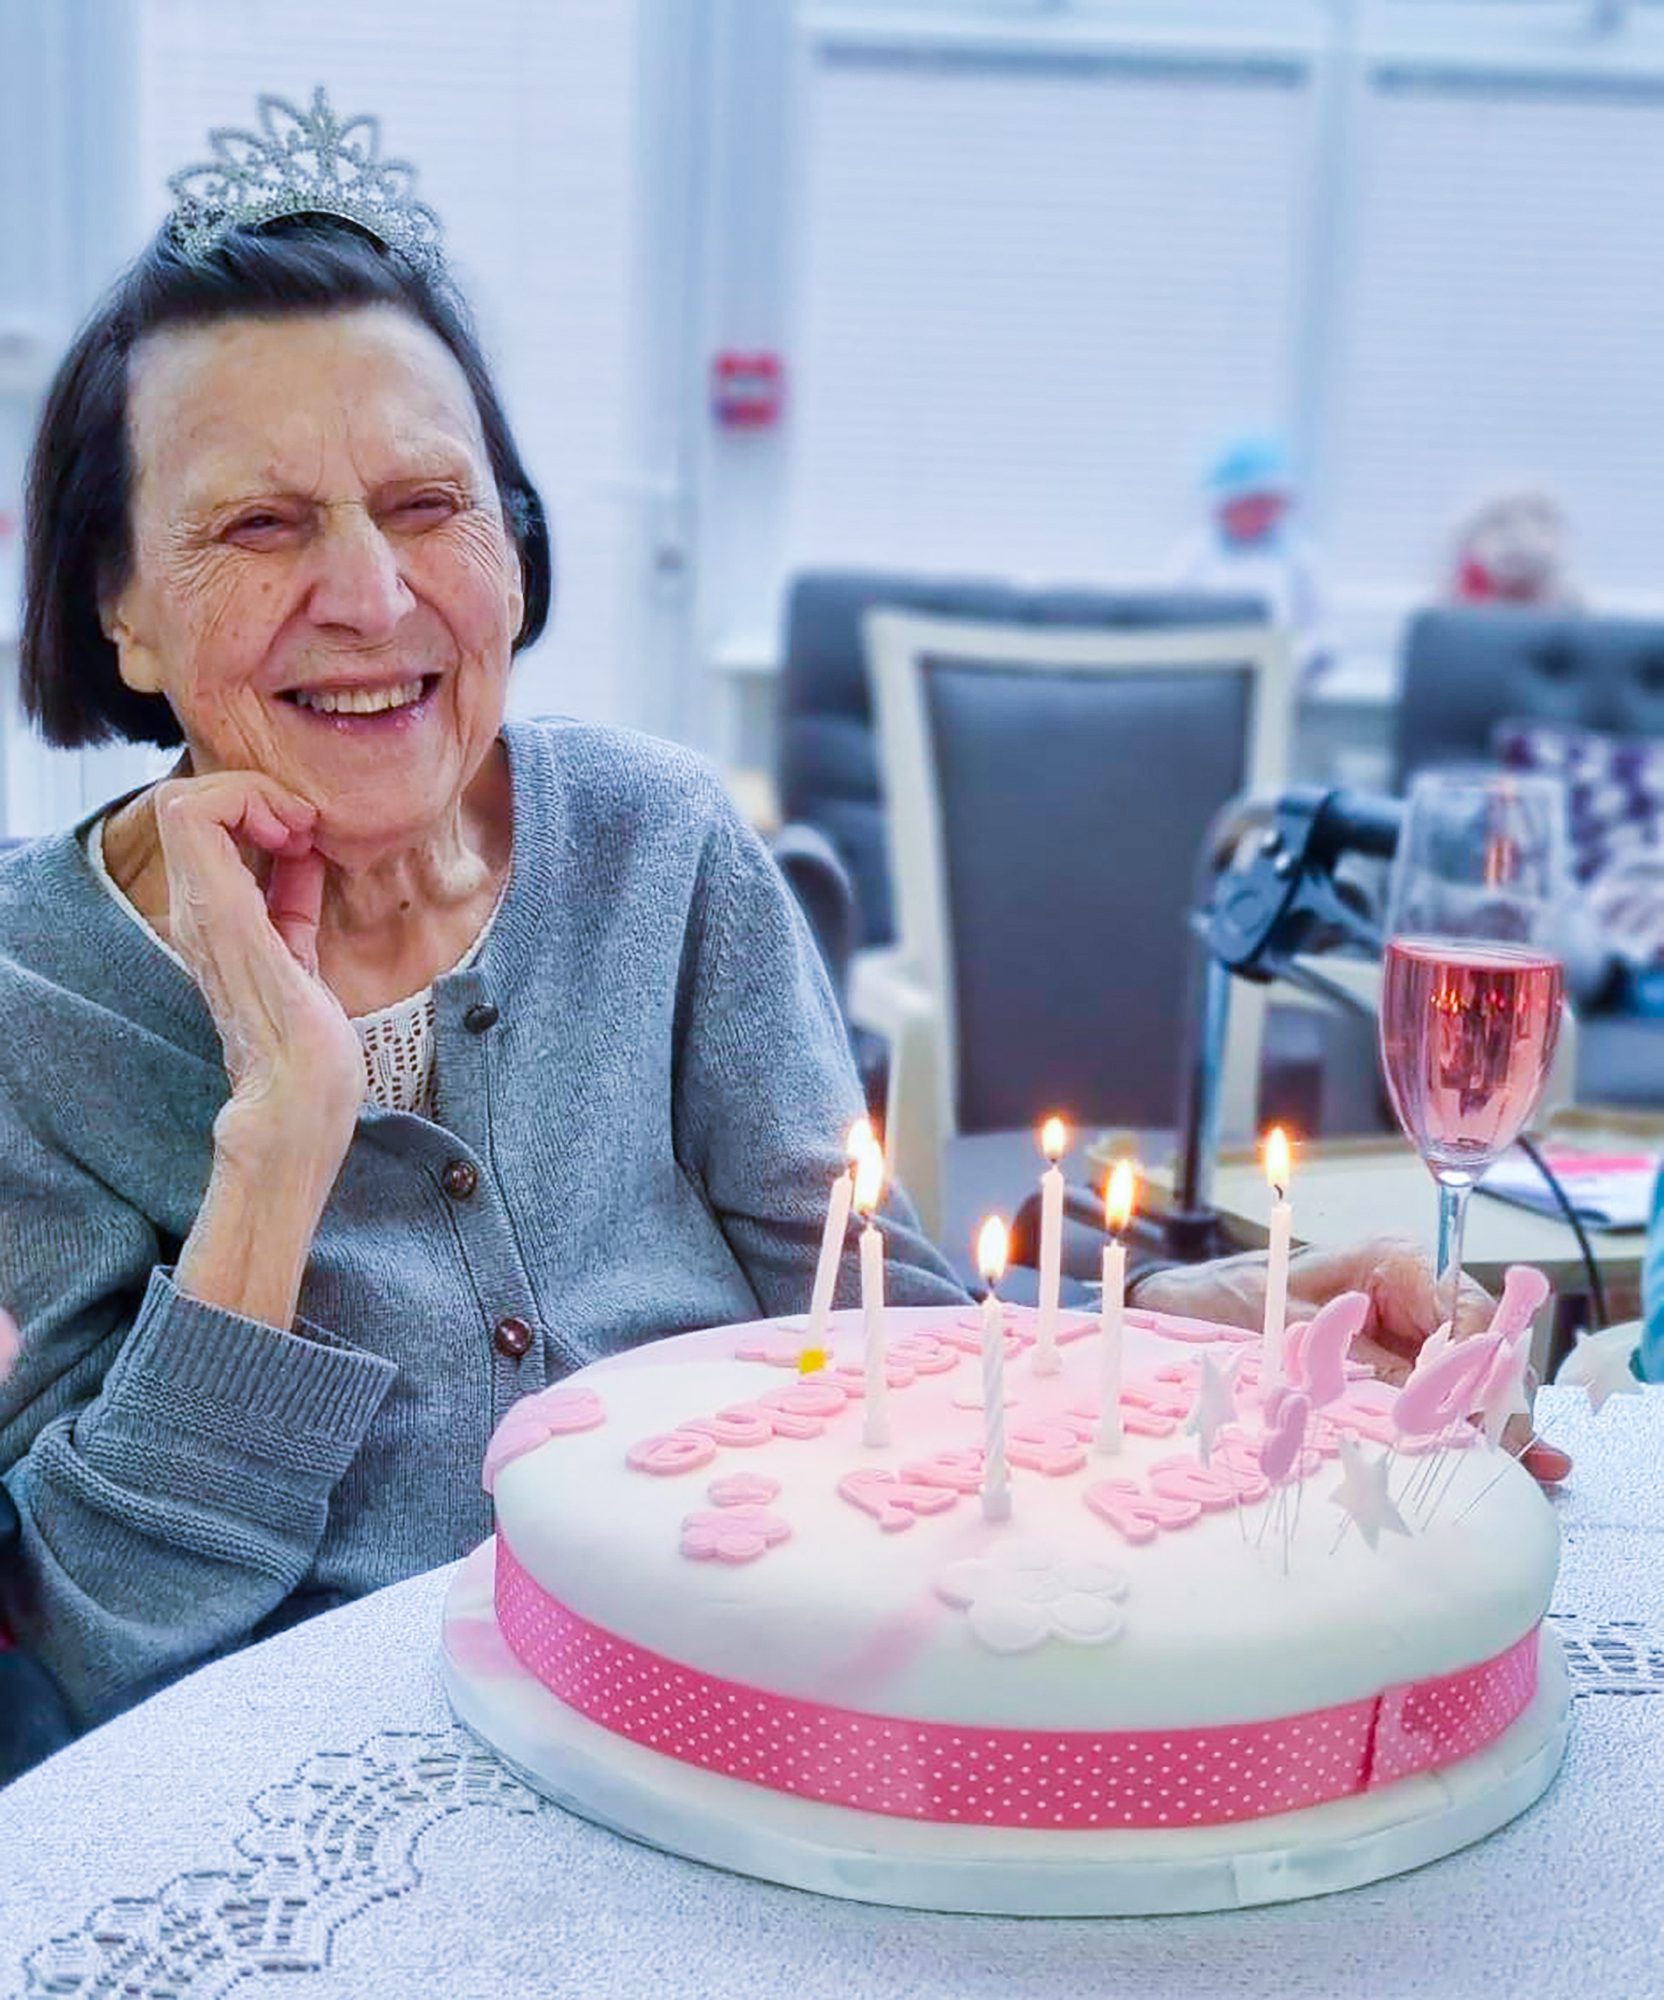 International Day of Older Persons: Blanche on her birthday.